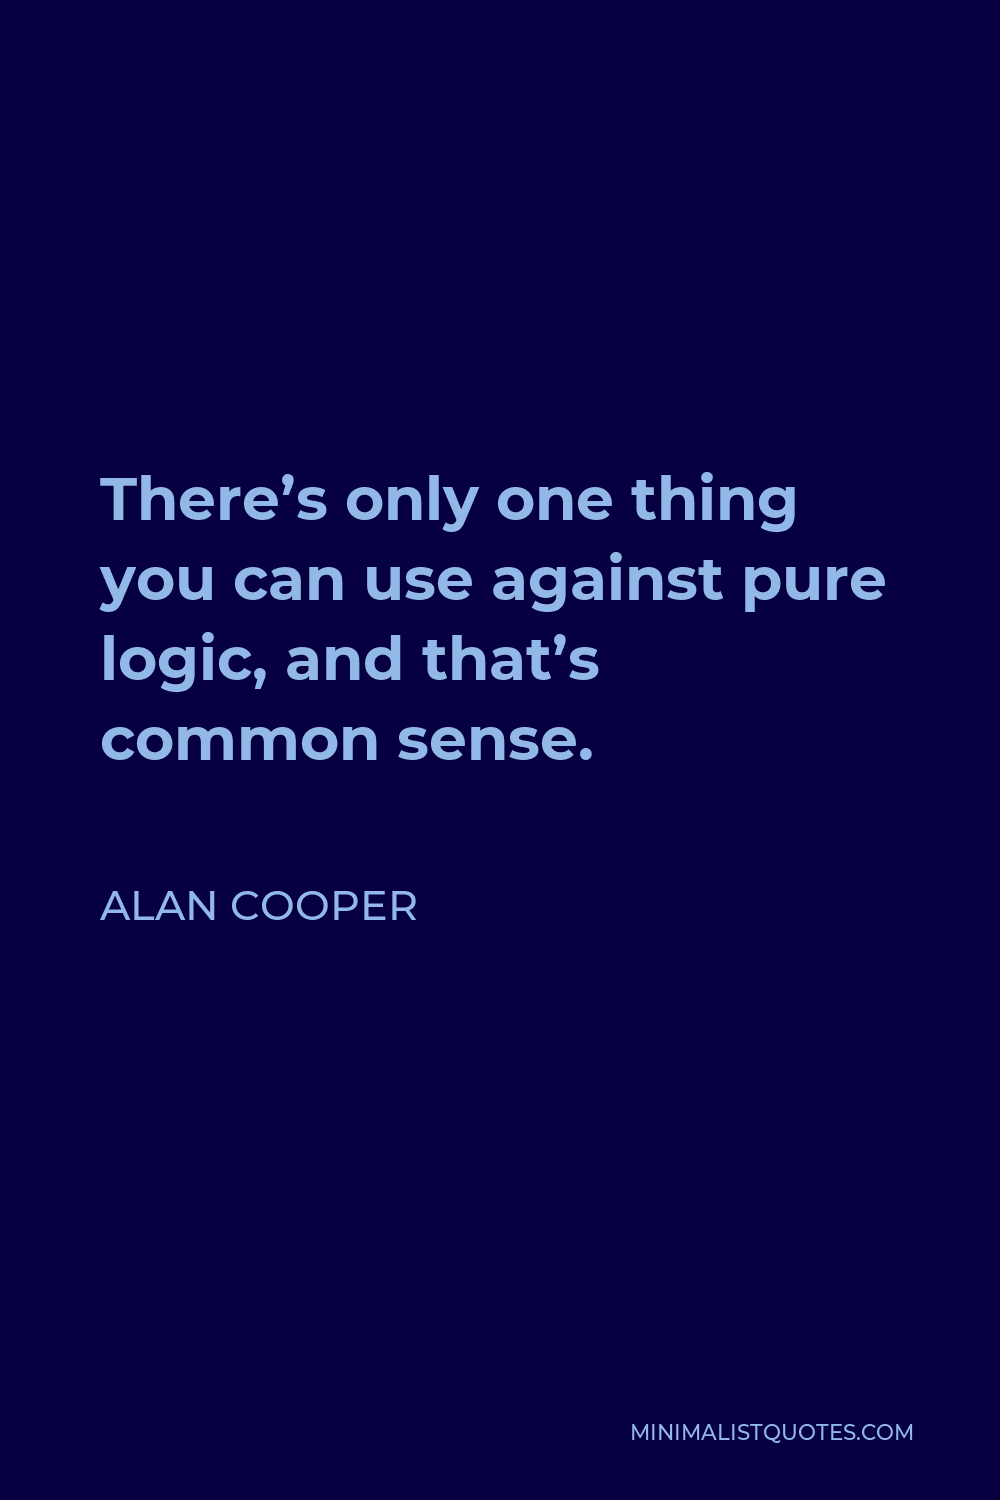 Alan Cooper Quote - There’s only one thing you can use against pure logic, and that’s common sense.